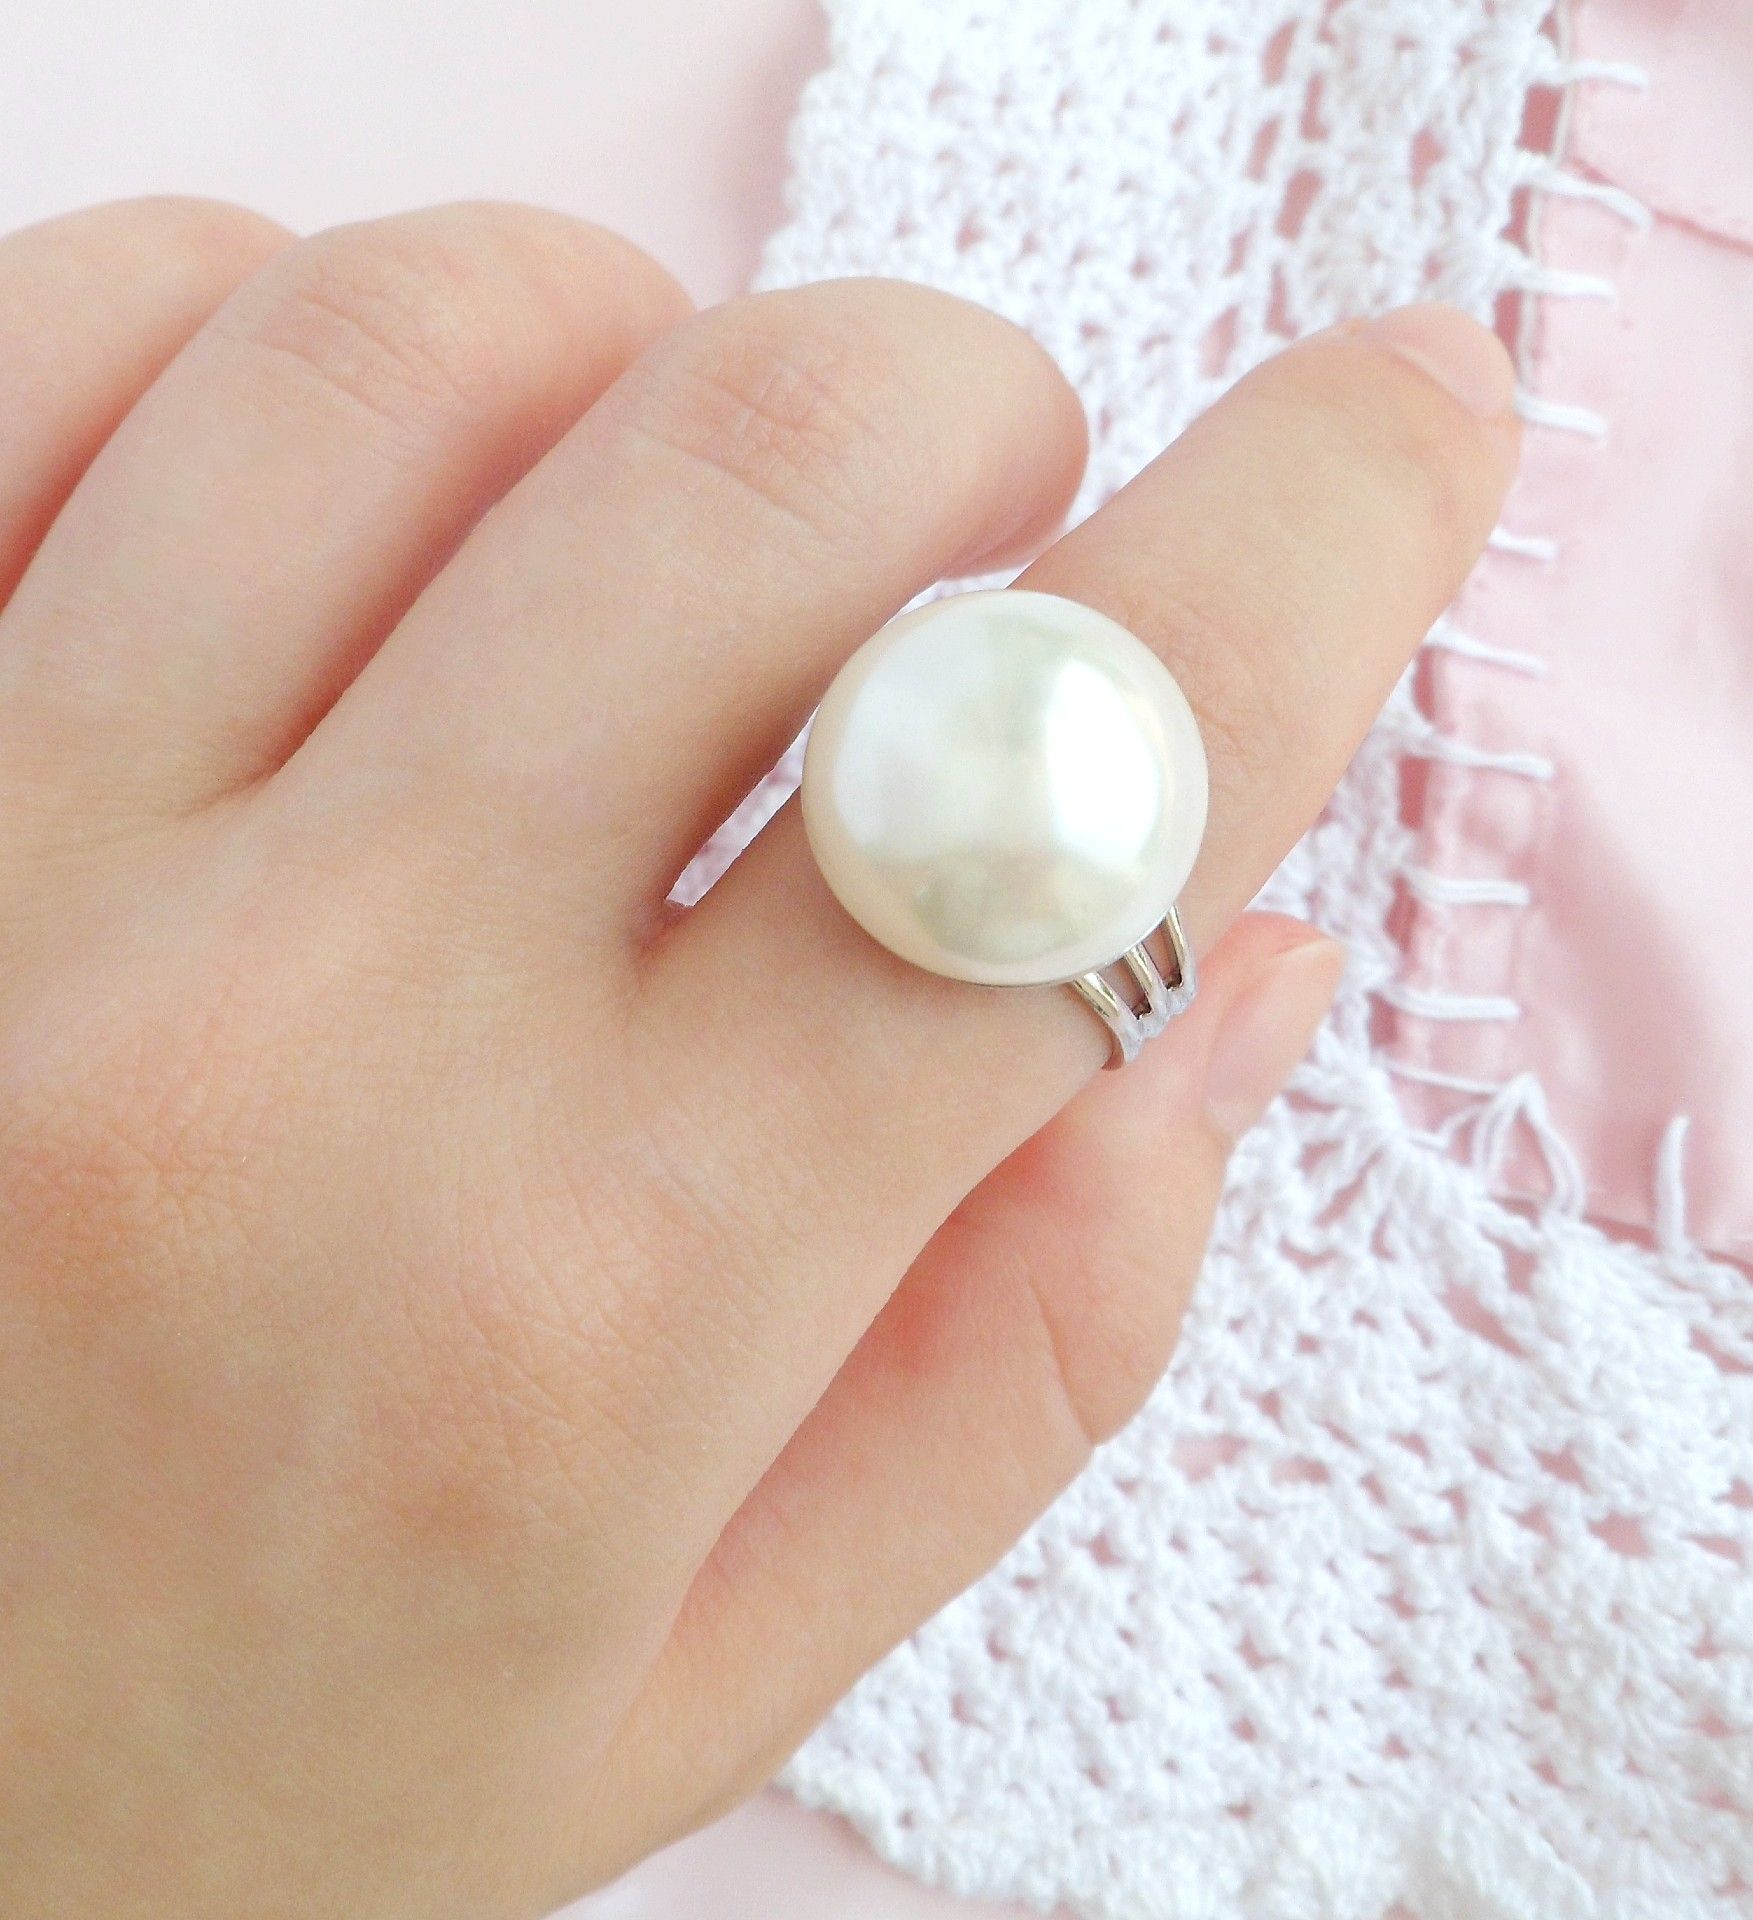 100% Handcrafted Natural Thai Pearl Ring 925 Sterling Silver Large Cultured White  Pearl Elegant Vintage Style - Fairtrade #103 - Chinese Fashion Style . com